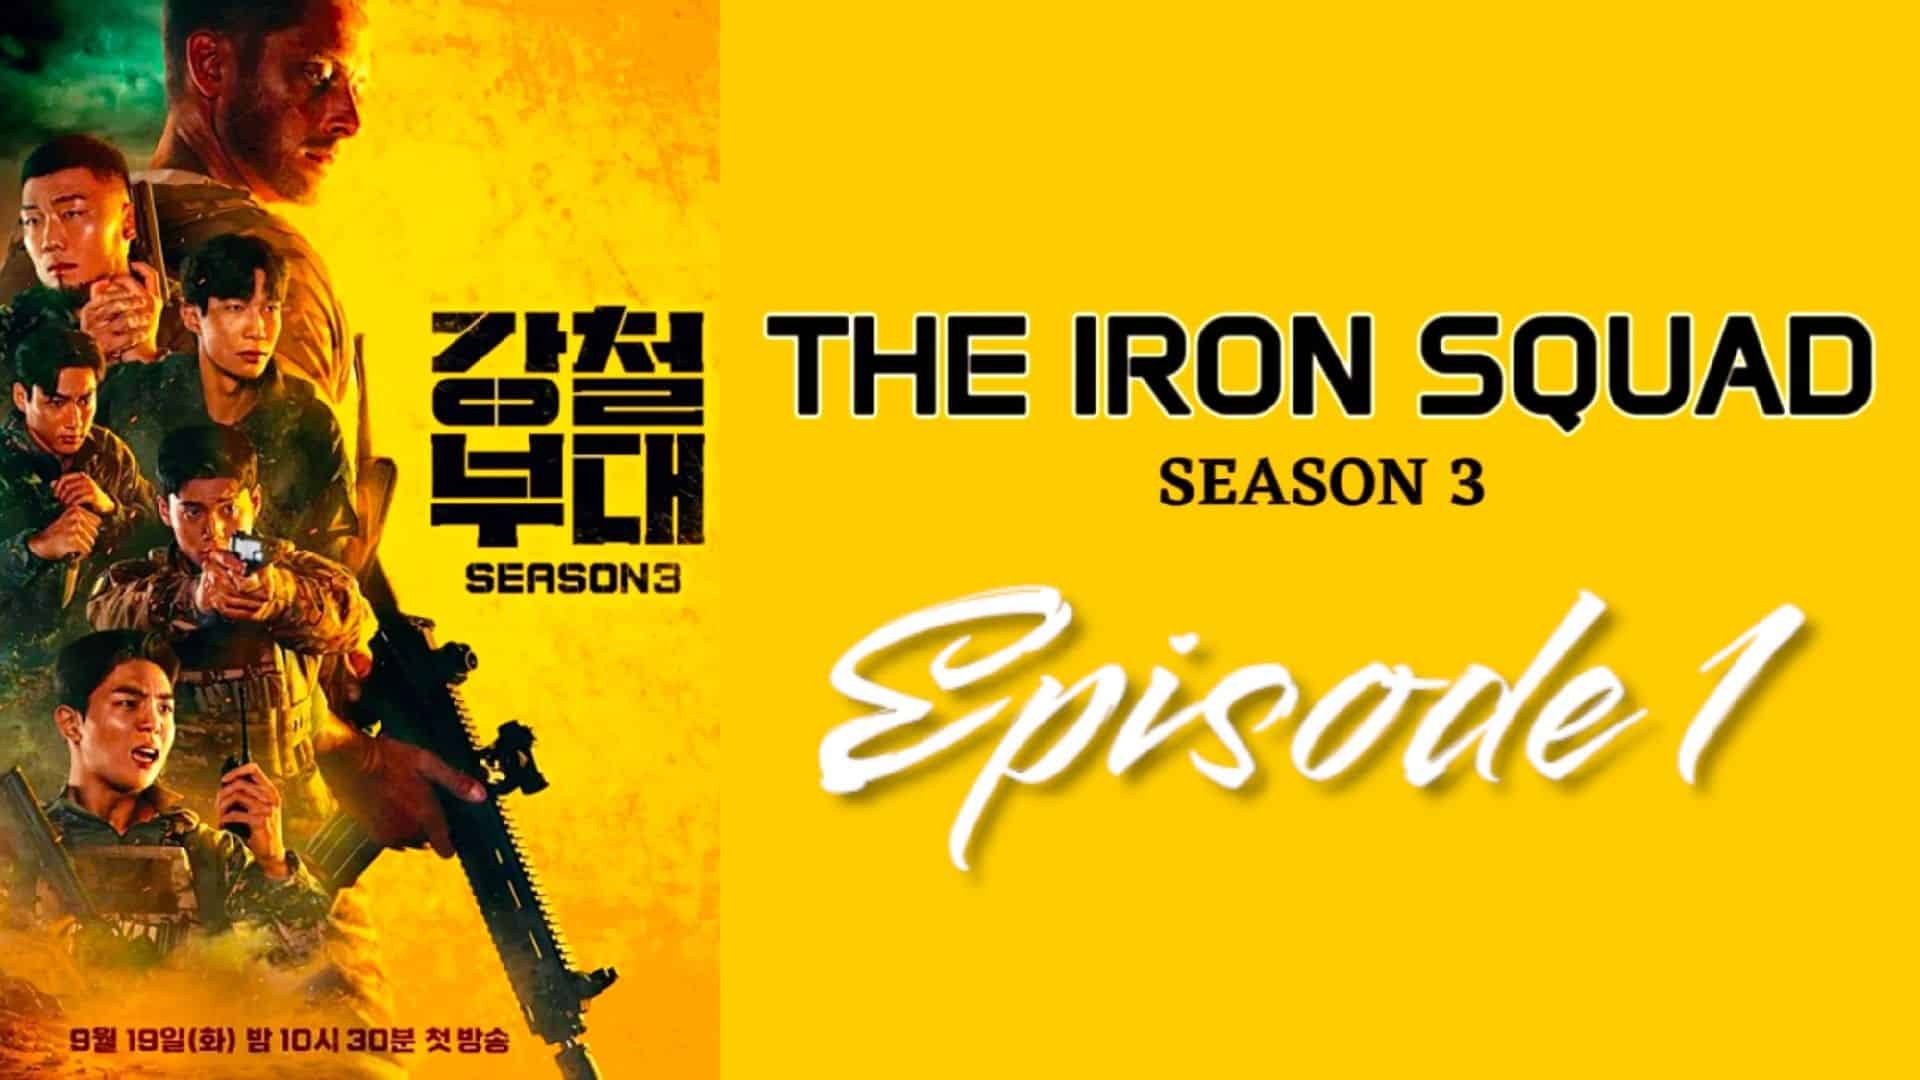 The Iron Squad Season 3 Episode 5: Release Date, Preview and Streaming Guide